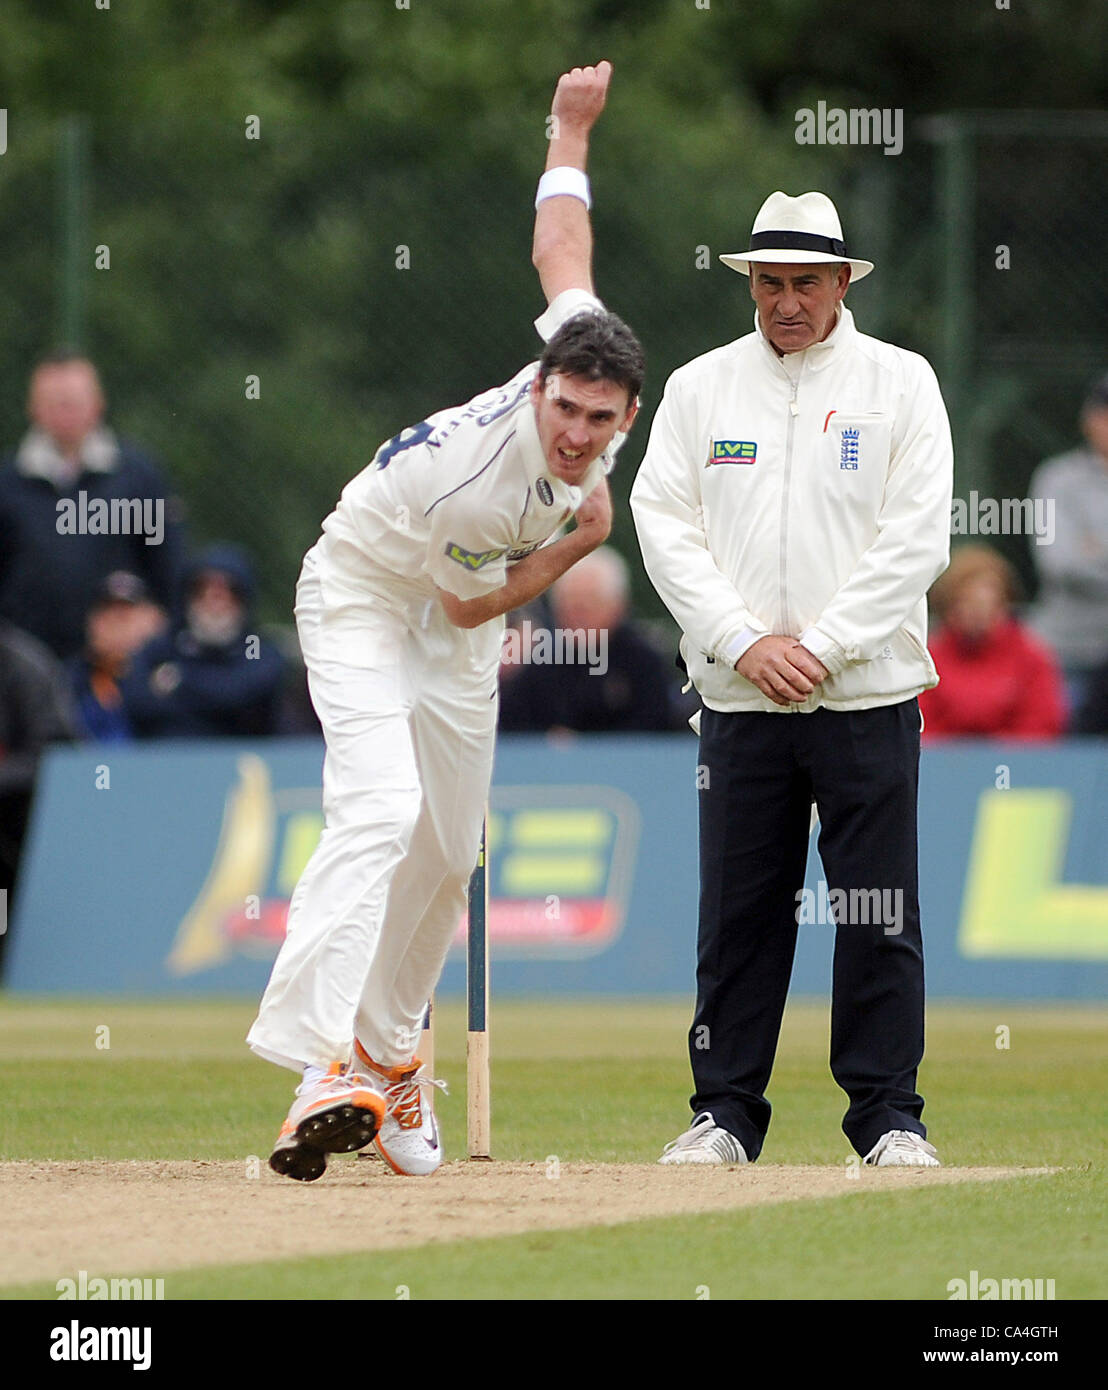 Horsham, Sussex, UK. 6th June 2012 - Sussex bowler Steve Magoffin in action against Surrey in their LV league 1 County Championship match at Horsham today Stock Photo